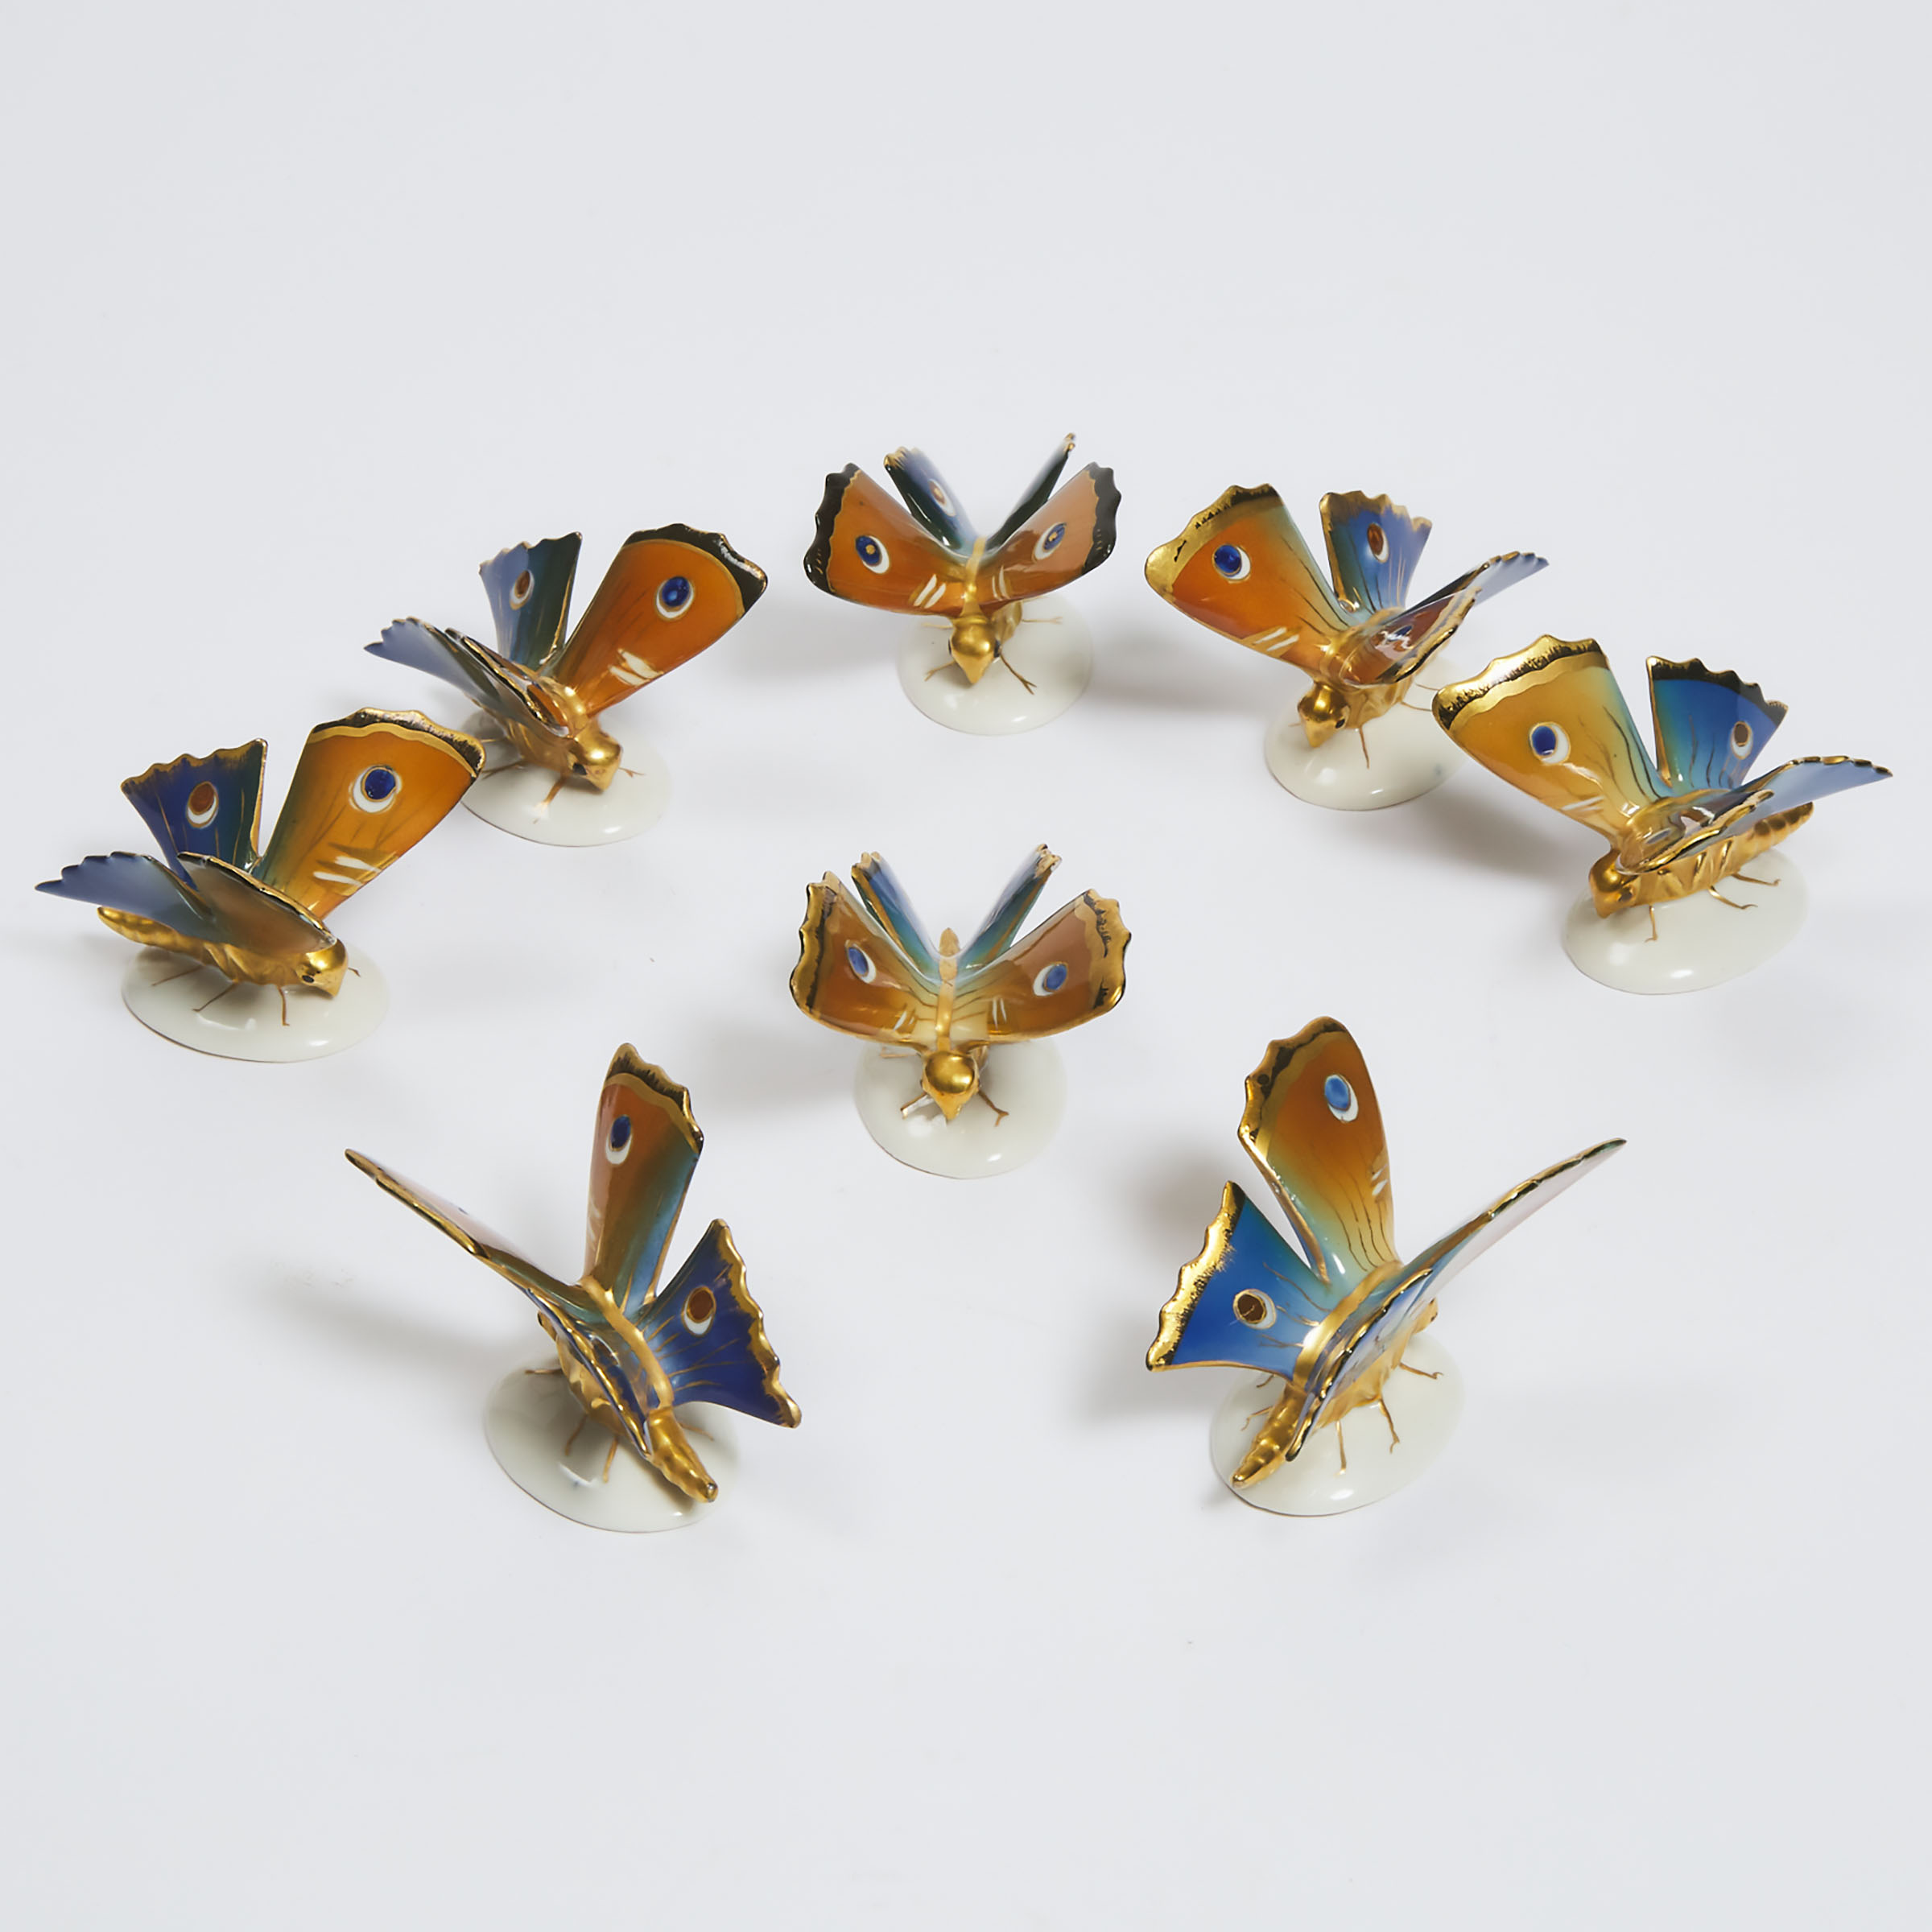 Eight Volkstedt Butterfly-Form Place-Card Holders, 20th century